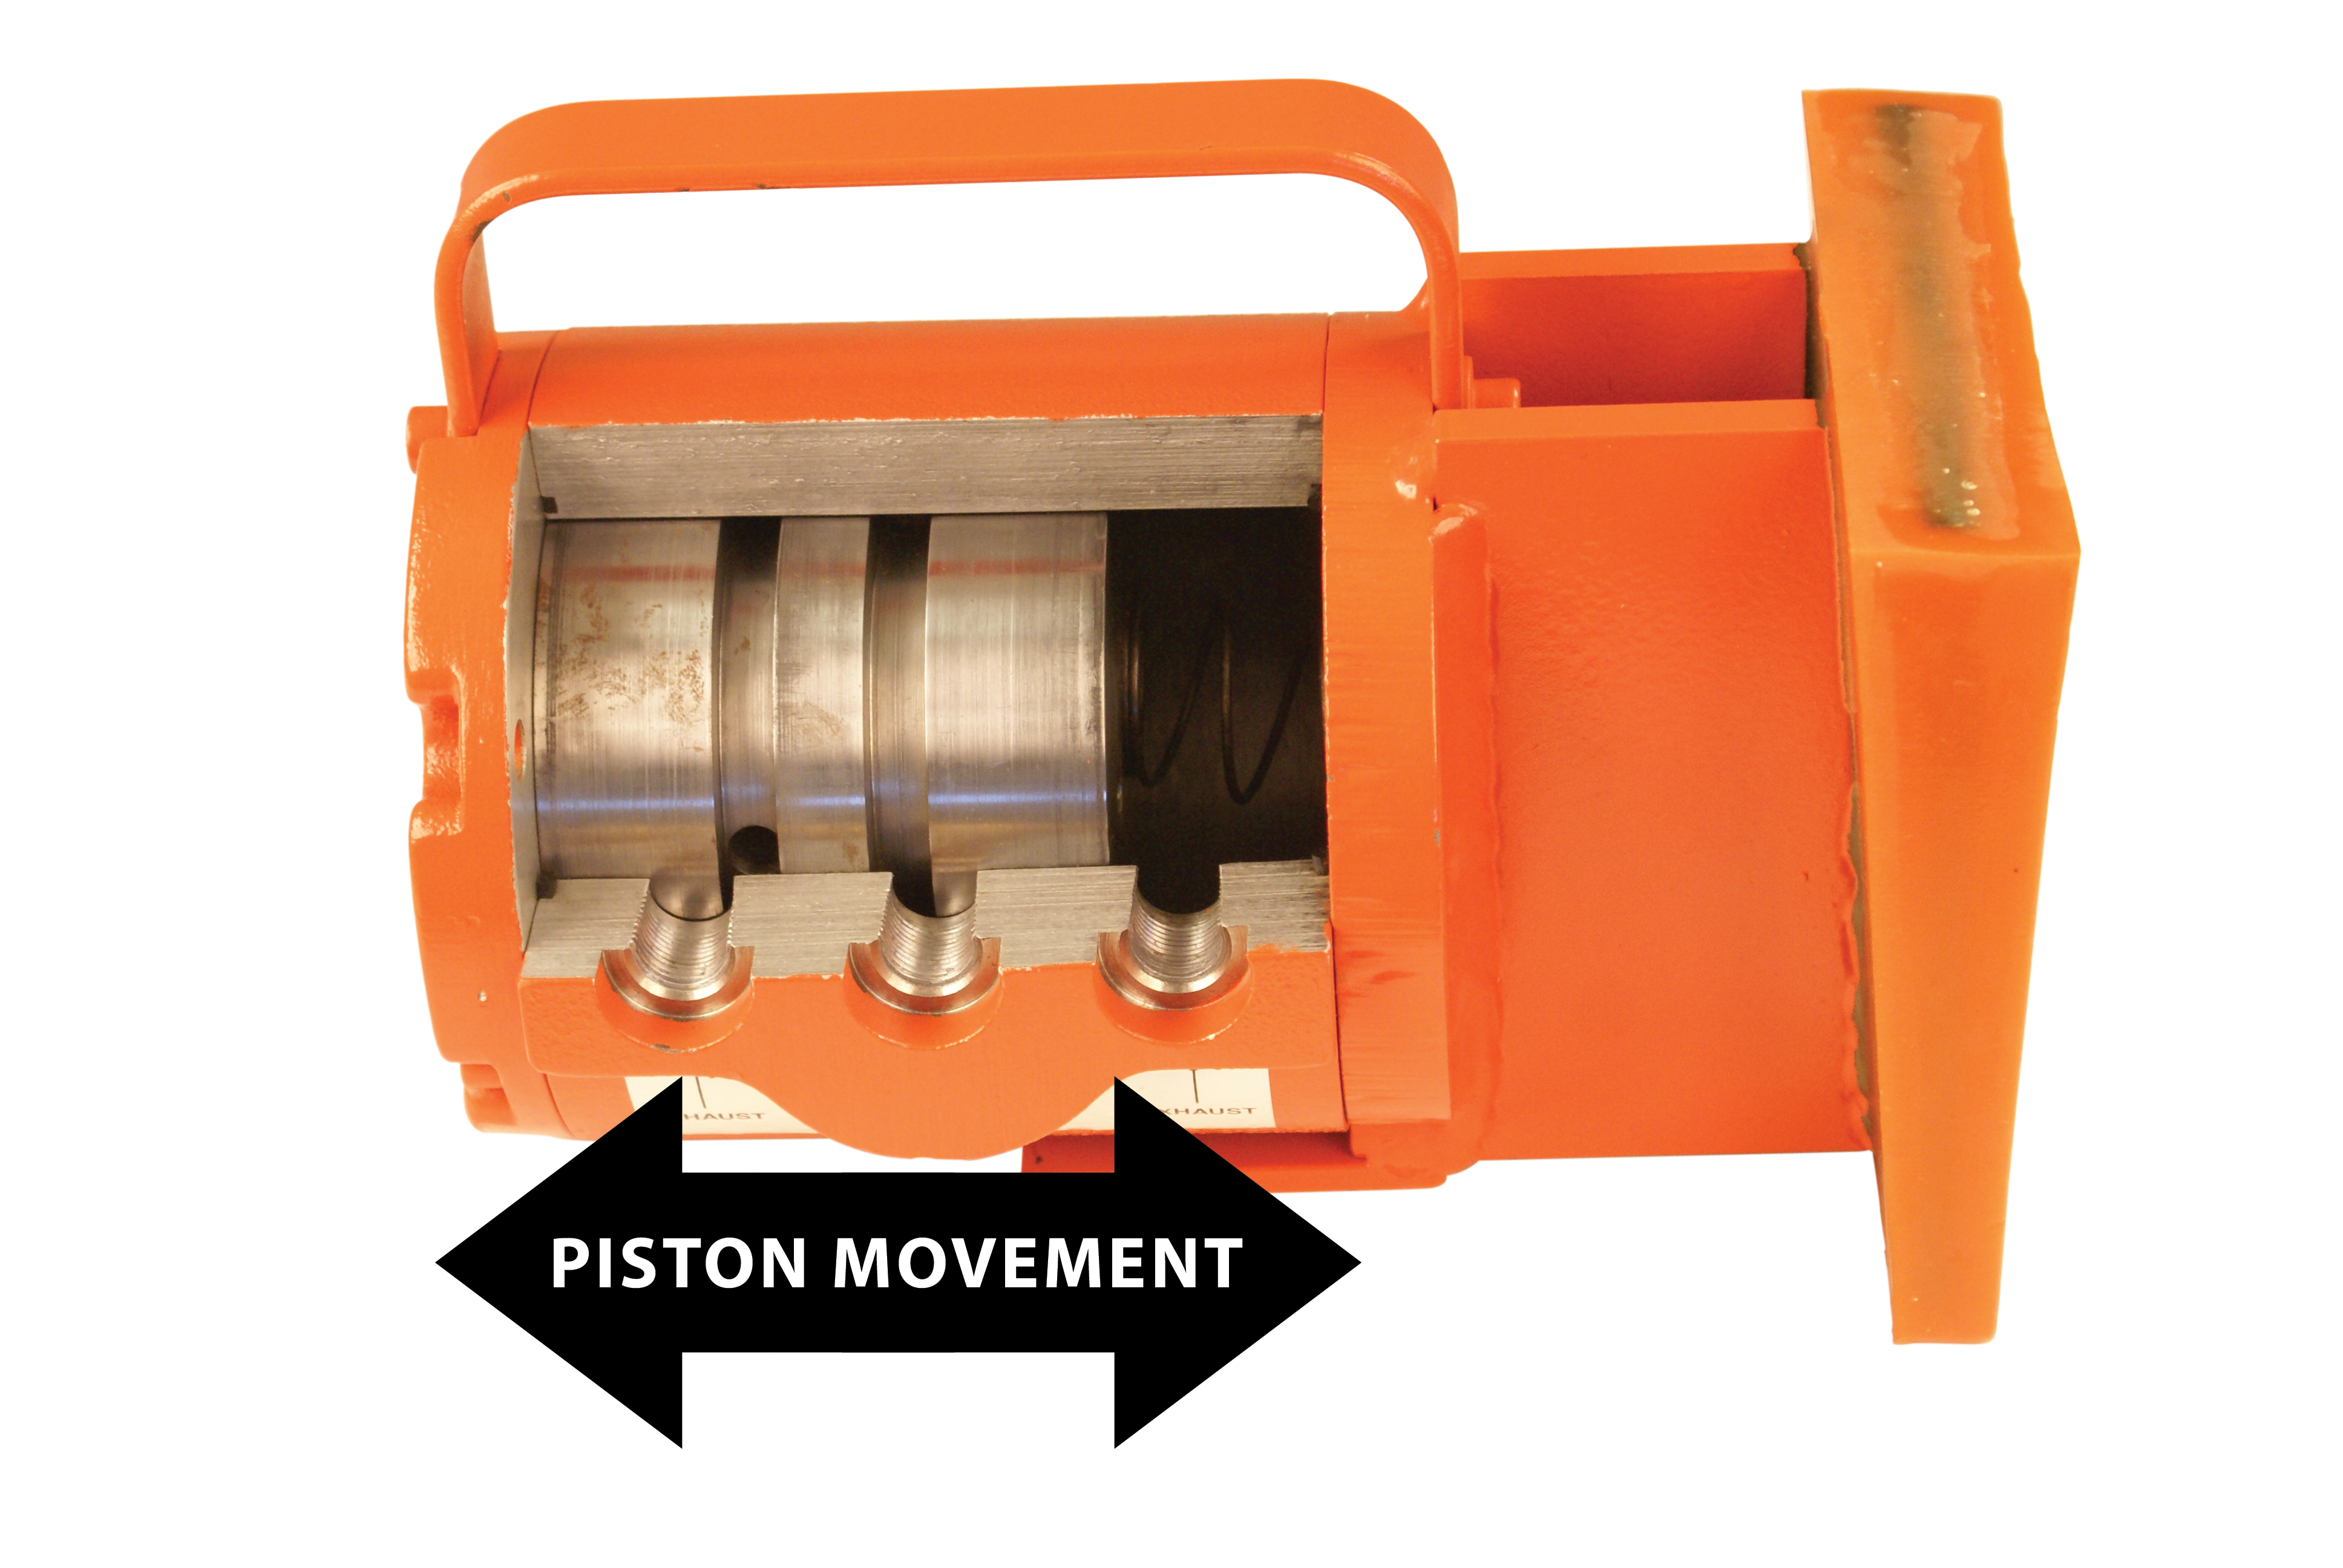 A cutaway of a linear piston shows the piston inside the vibrator casing. An overlaid arrow shows the piston movement is in-line with the piston.